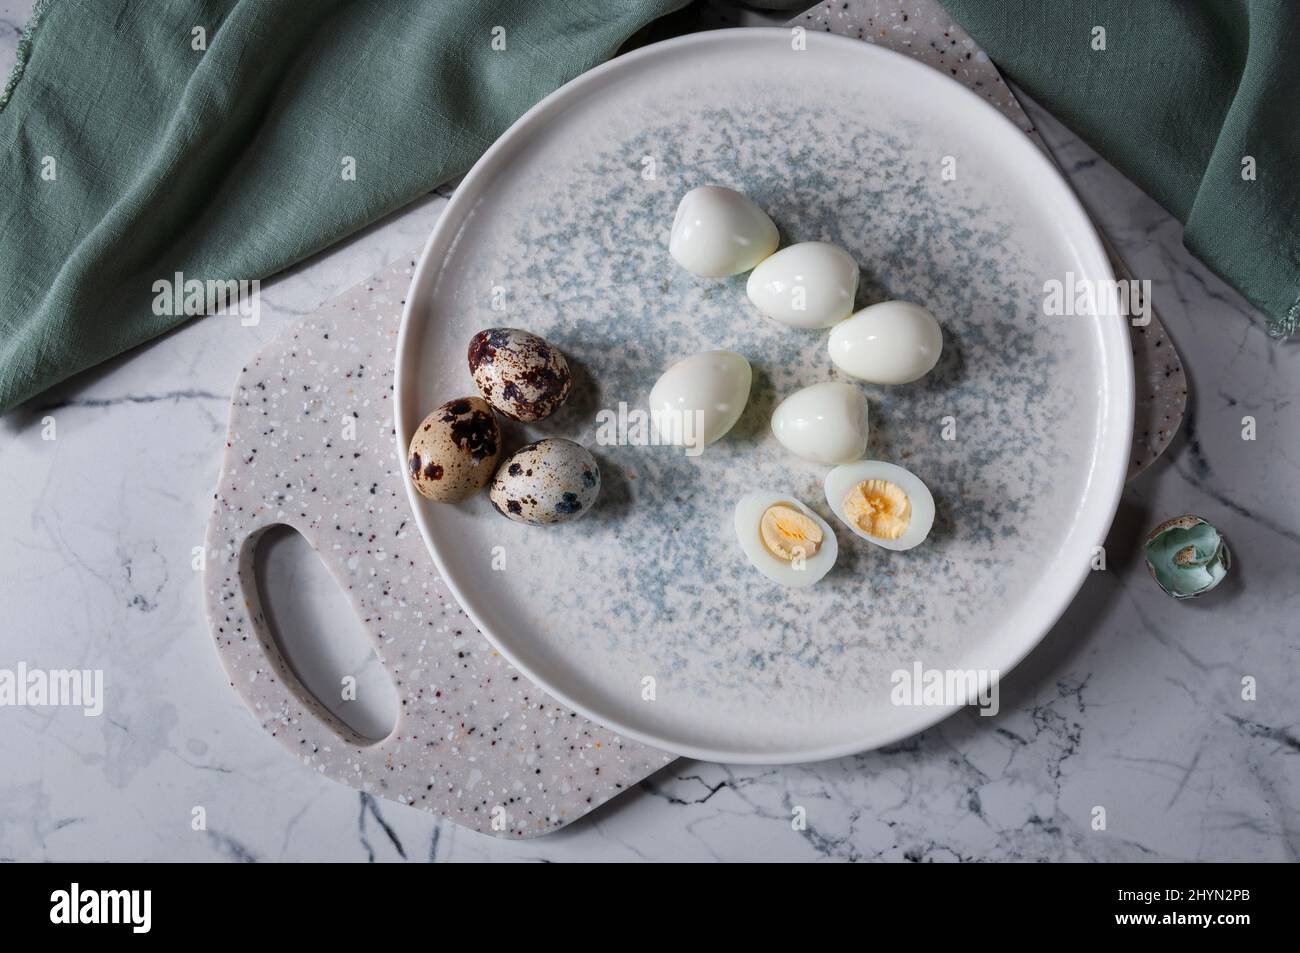 Boiled eggs lying on a plate, on a board. Useful and tasty ingredient. Stock Photo